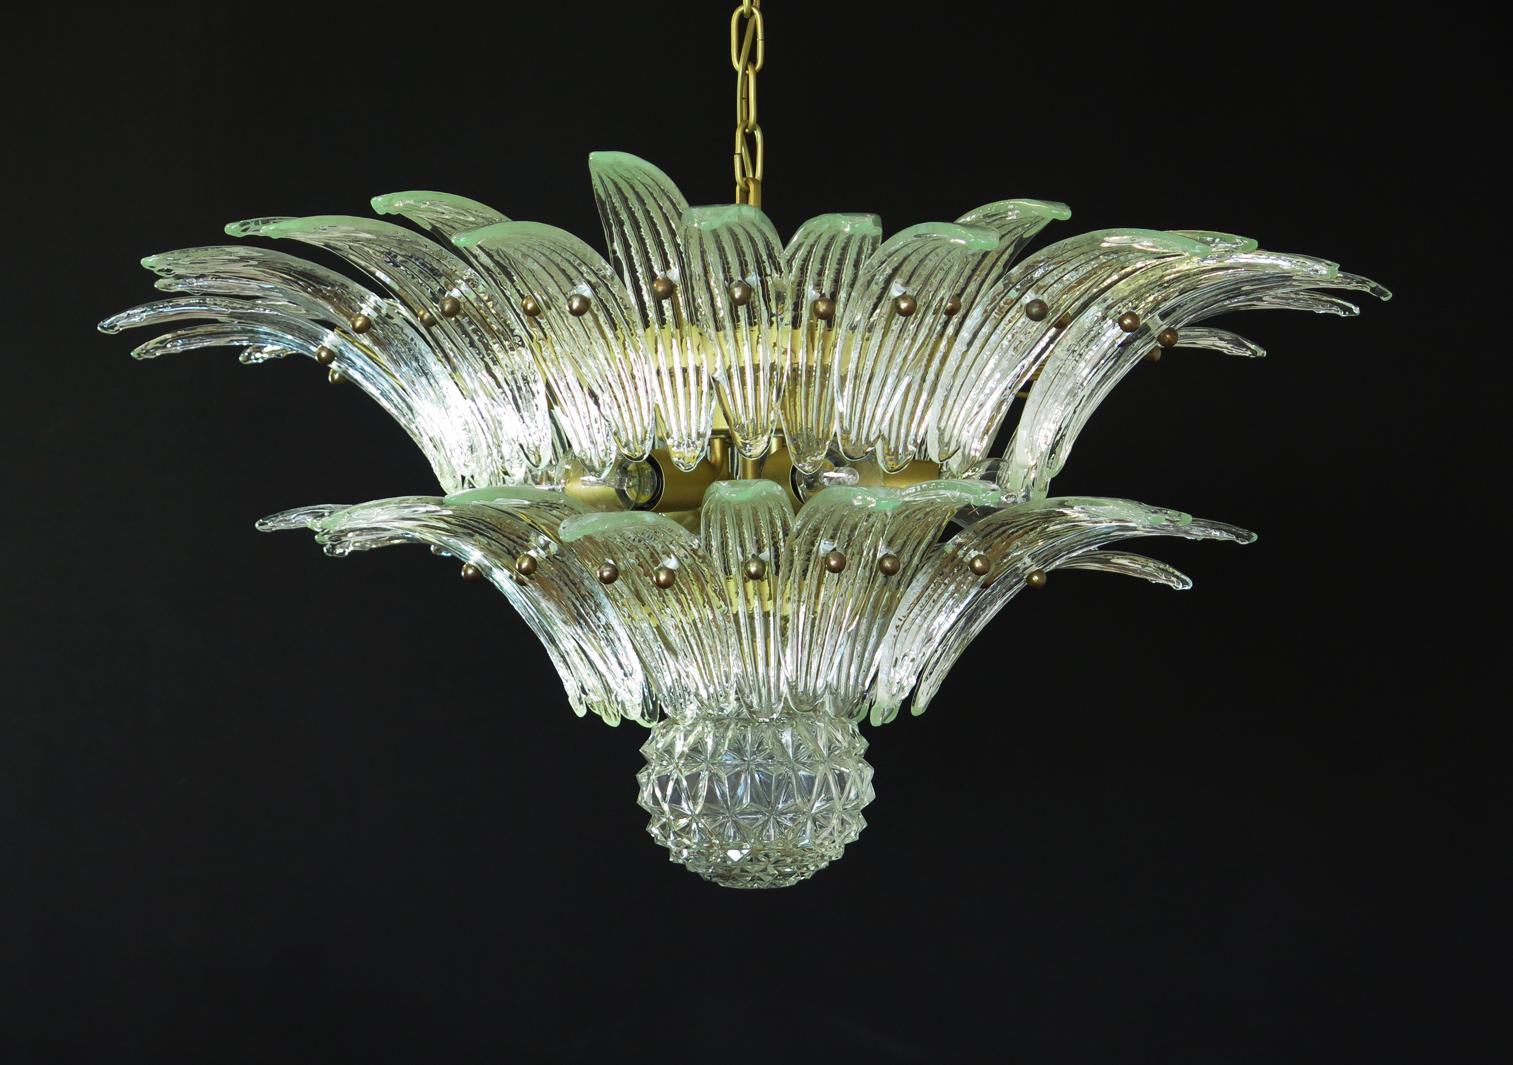 Luxury and genuine Murano glass chandelier. Handmade in Murano. It made by 58 Murano crystal glasses in a gold metal frame. The chandelier has also a Murano glass ball in the end of the lamp. Murano blown glass in a traditional way.
Period: 1970s /